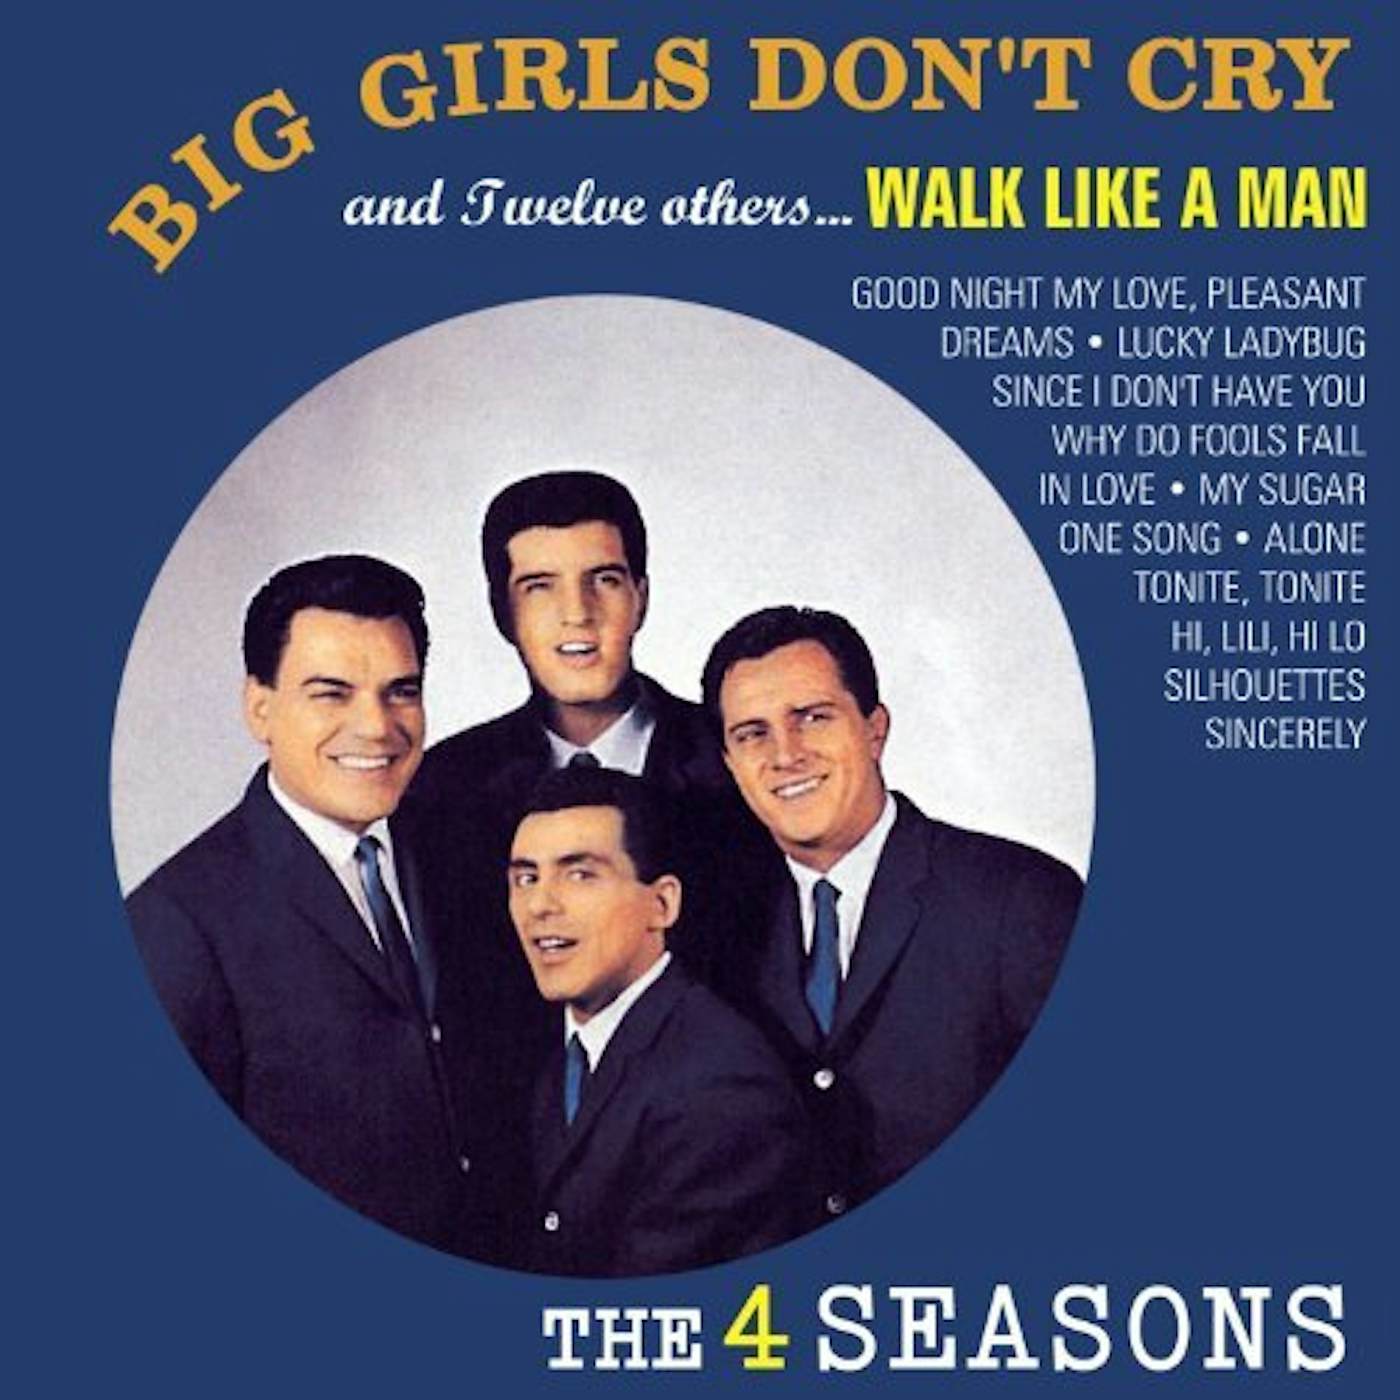 Four Seasons BIG GIRLS DON'T CRY & 12 OTHERS: LIMITED MONO CD